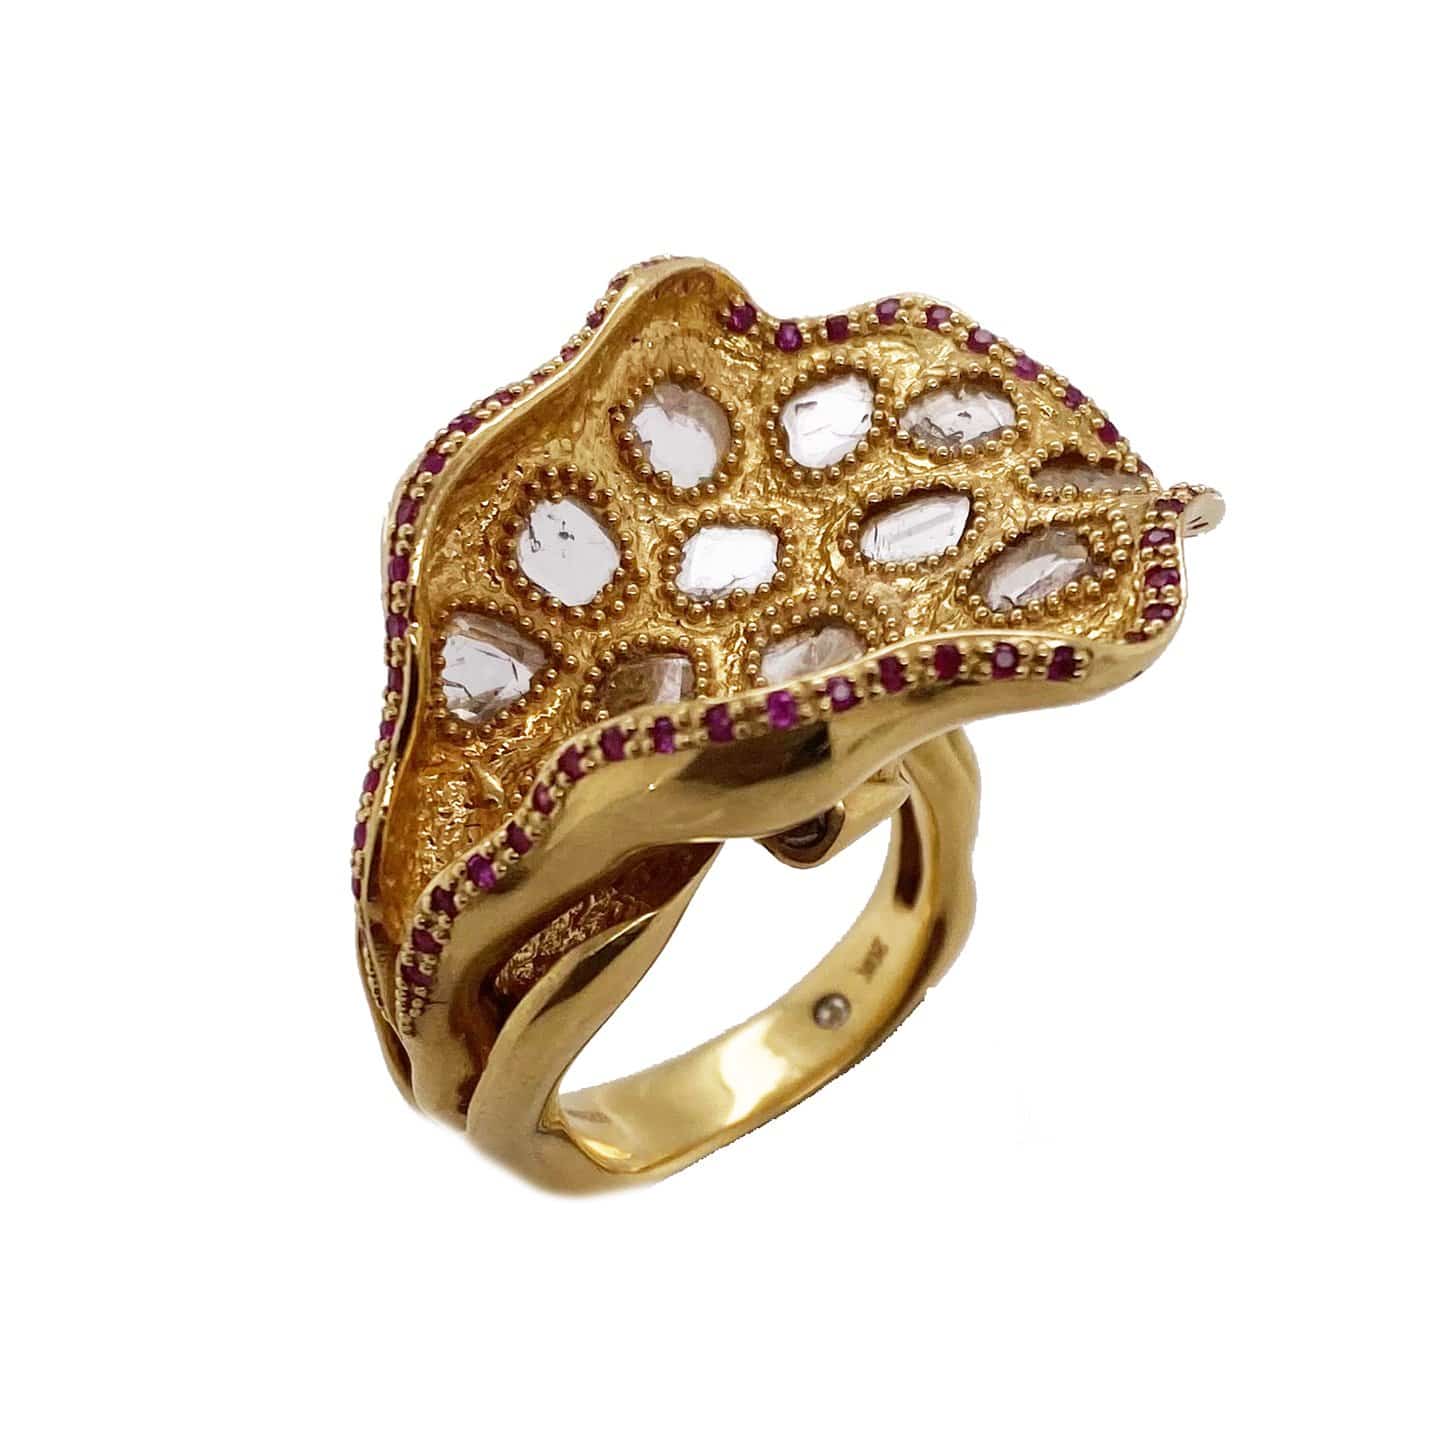 Vitality Leaf Ring with 20K Yellow Gold and Large Diamonds - Coomi